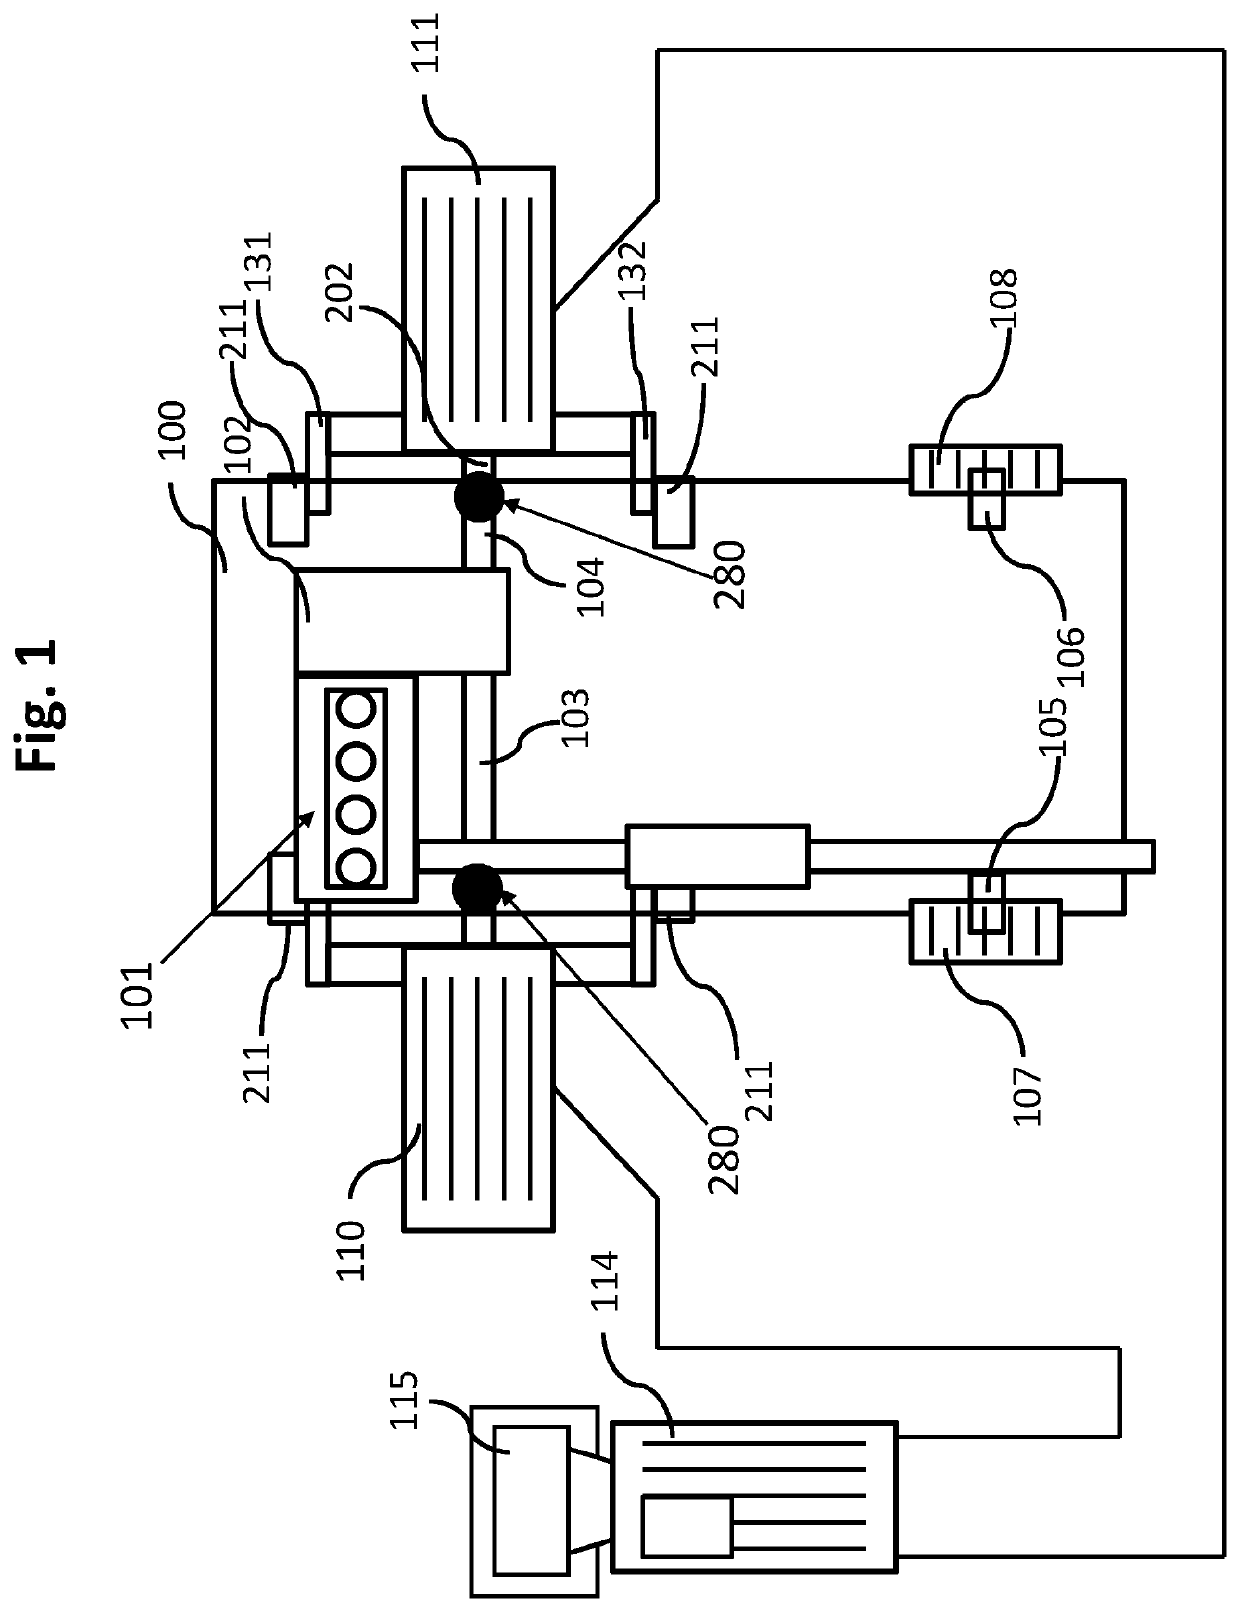 Method and apparatus for dynamometer testing of a motor vehicle